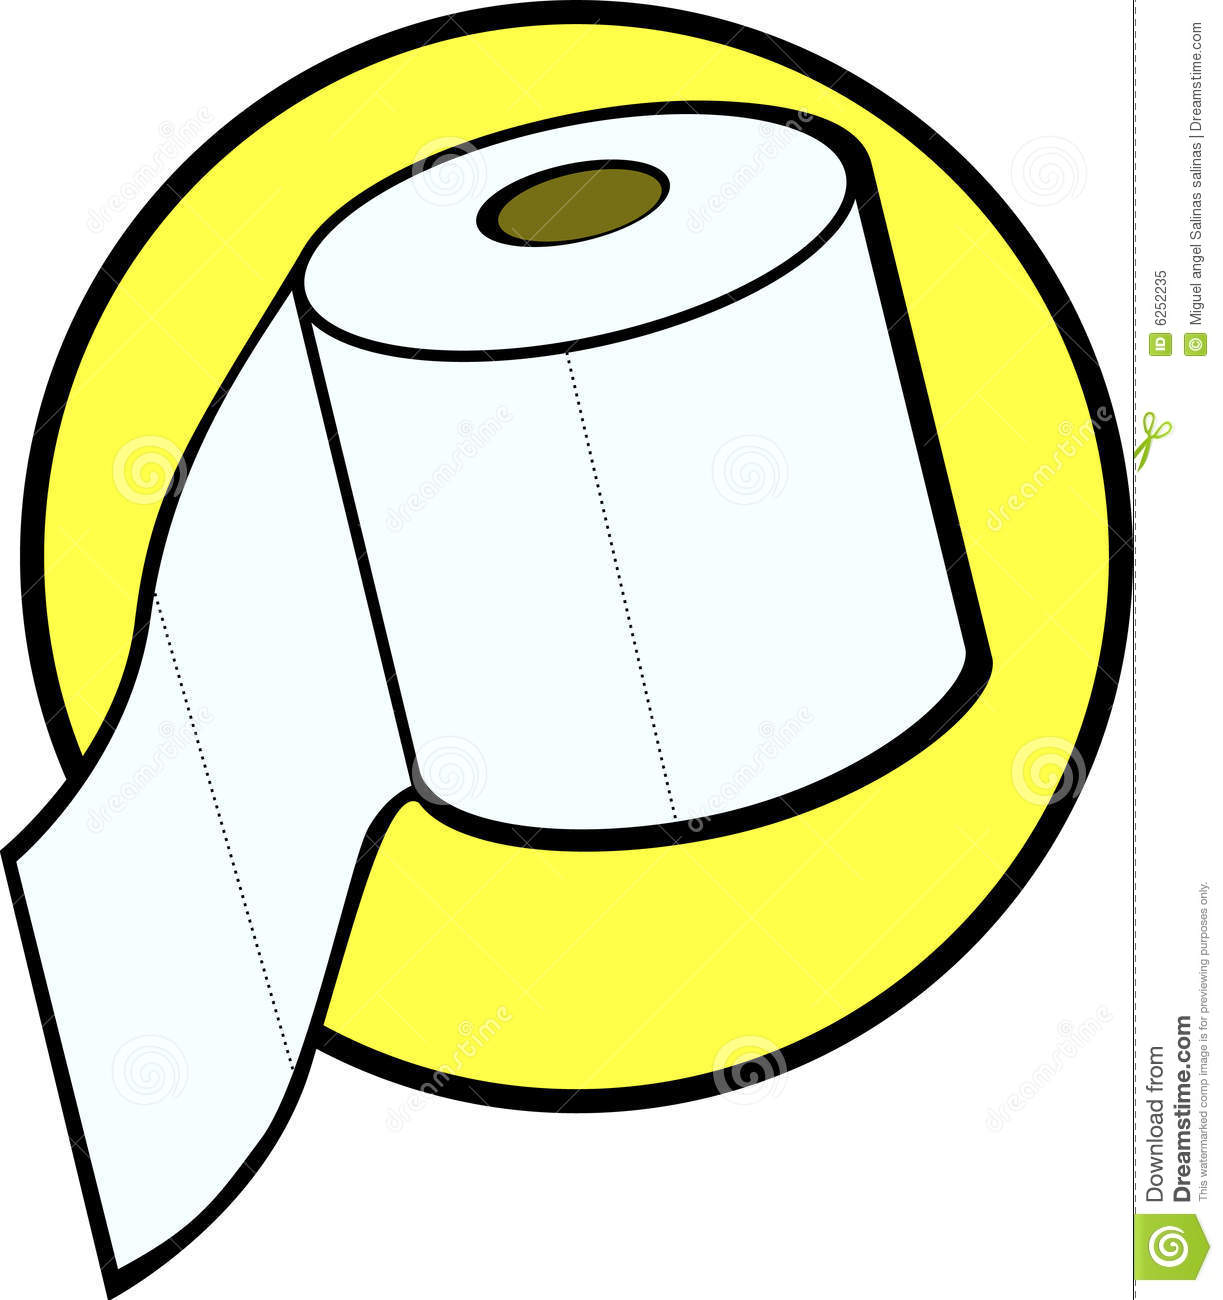 Toilet Paper Roll Vector Illustration Royalty Free Stock Photo   Image